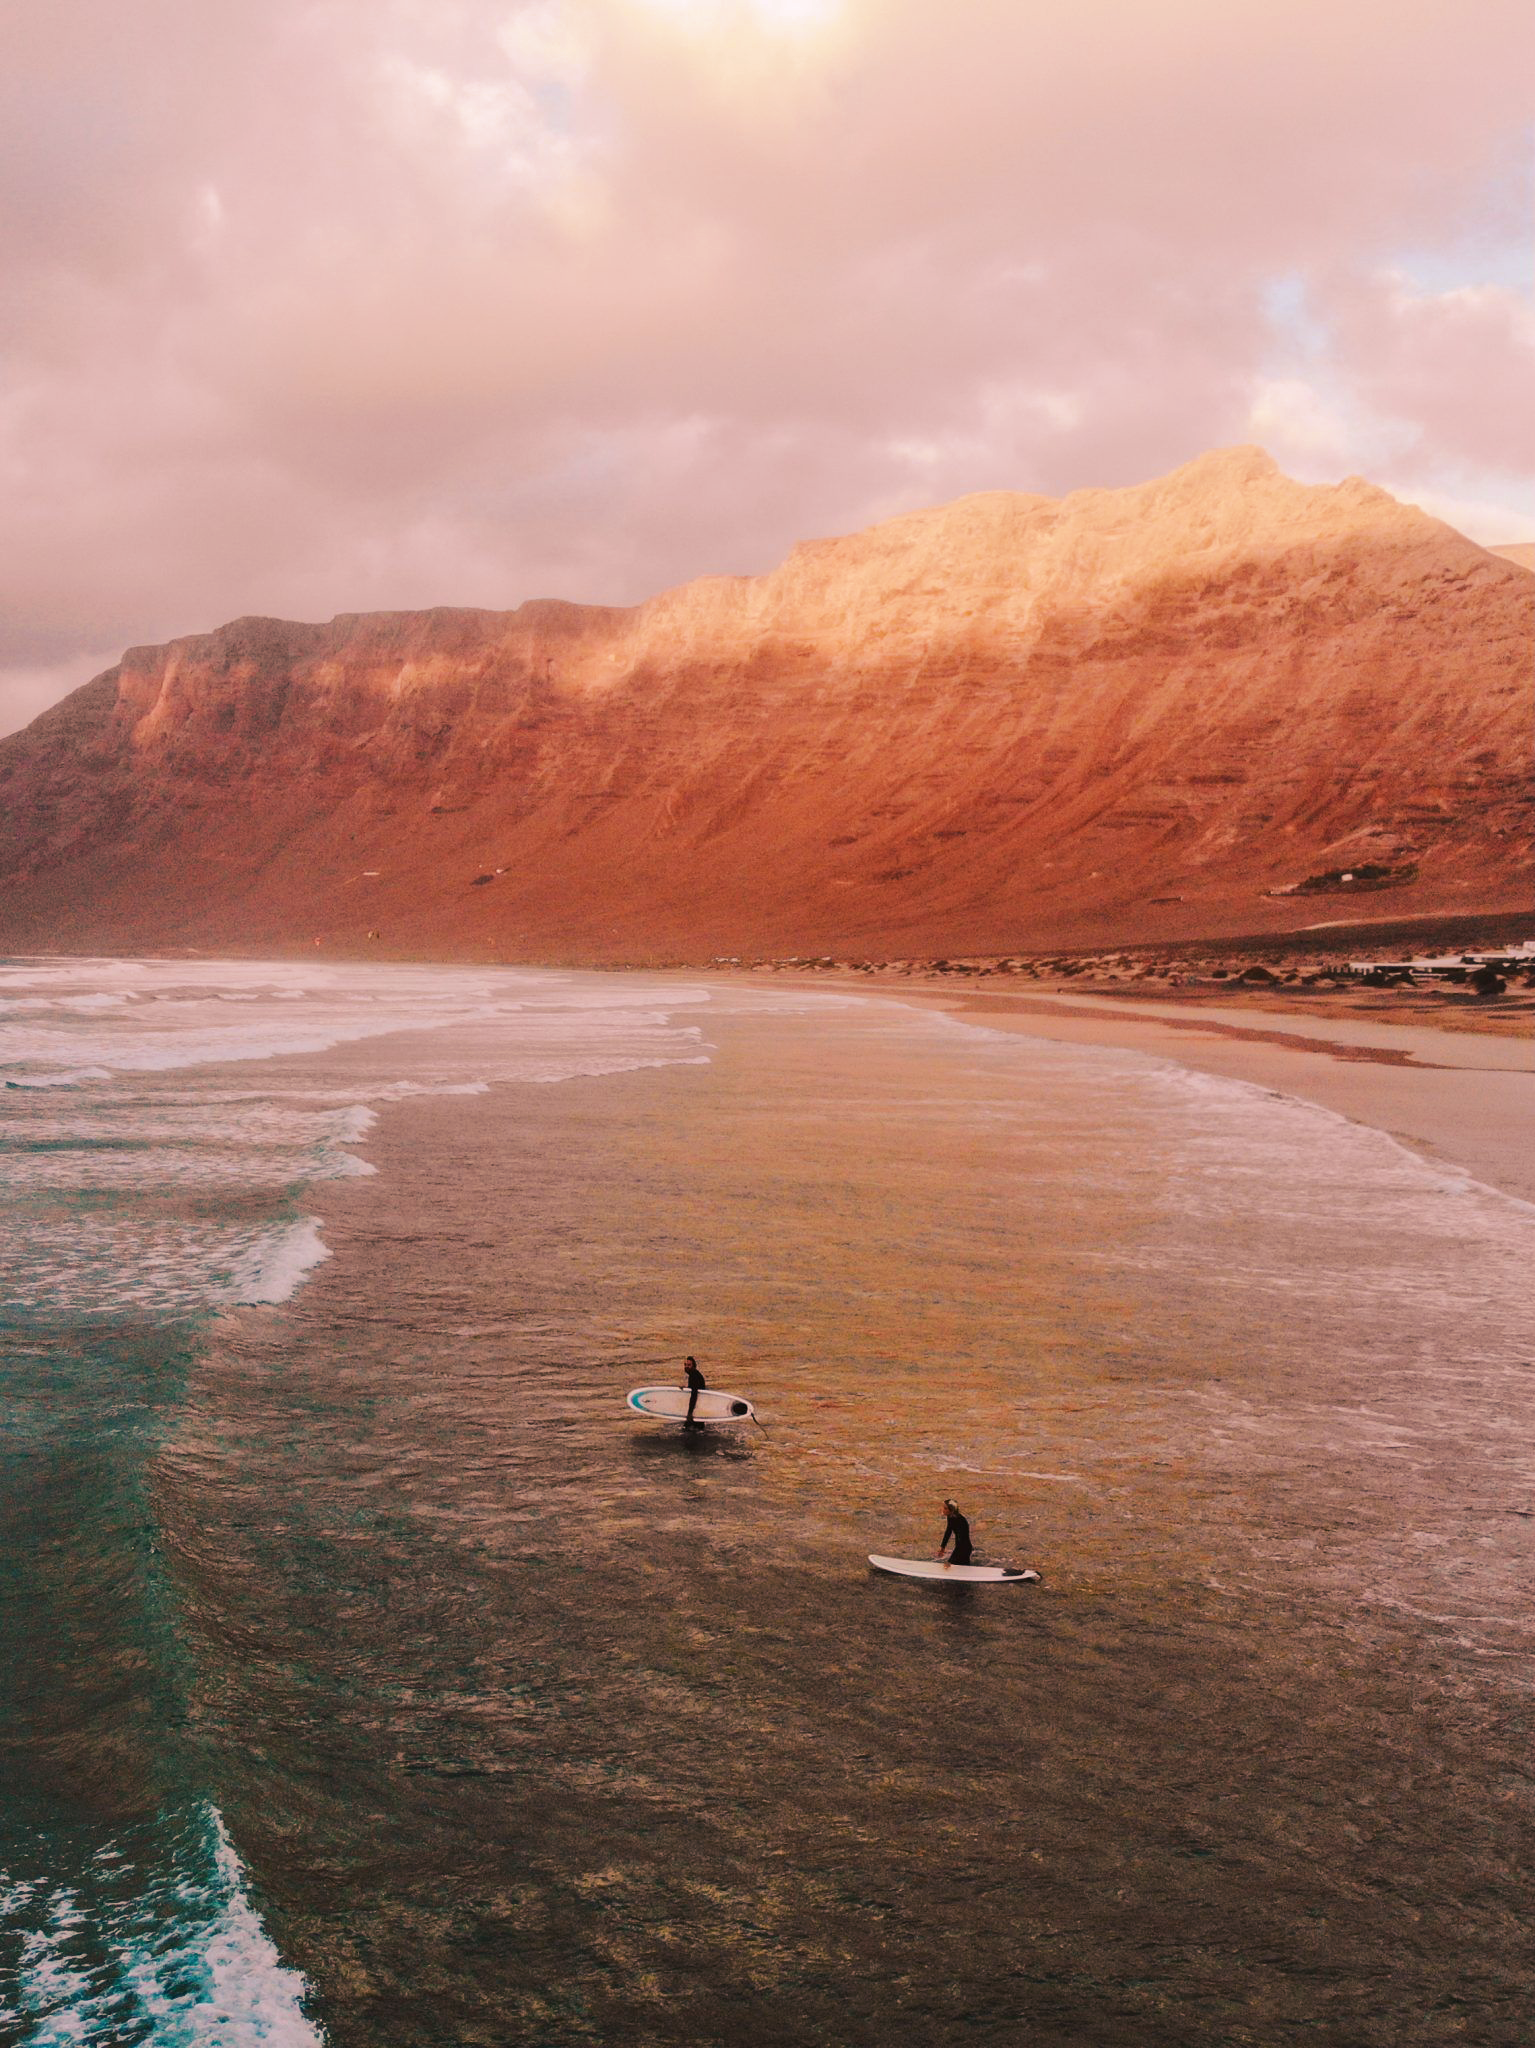 2 Surfers surging at sunset in the beach of Famara, Lanzarote